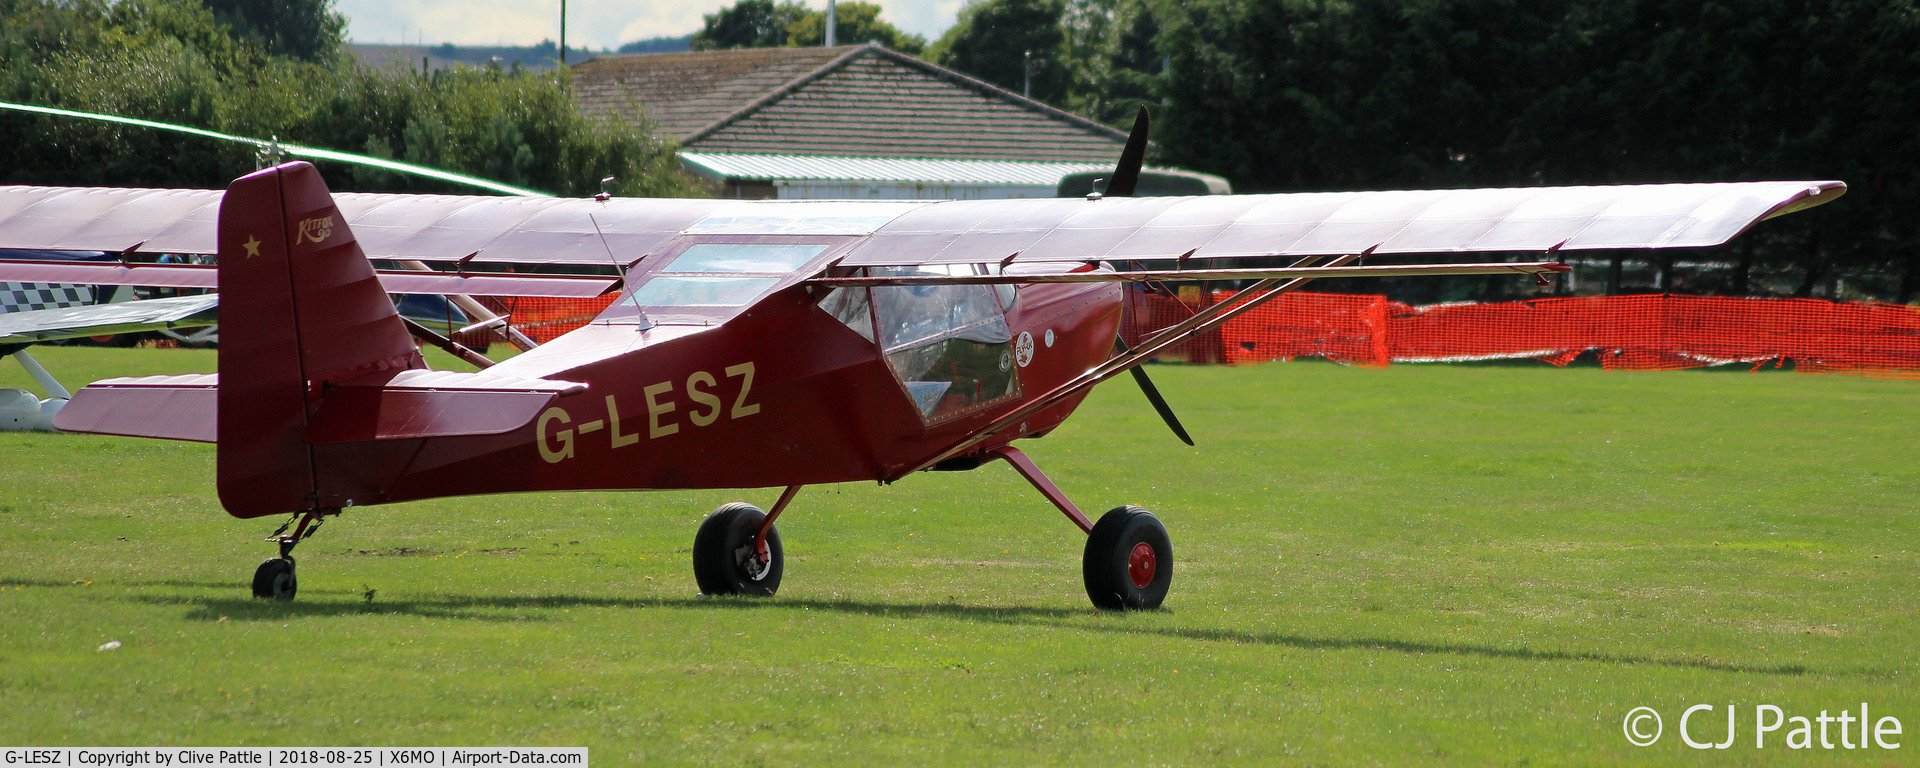 G-LESZ, 2003 Skystar Kitfox Series 5 C/N PFA 172C-12822, Present at the Montrose Air Station Heritage Centre light aircraft fly-in held on 25th August 2018.